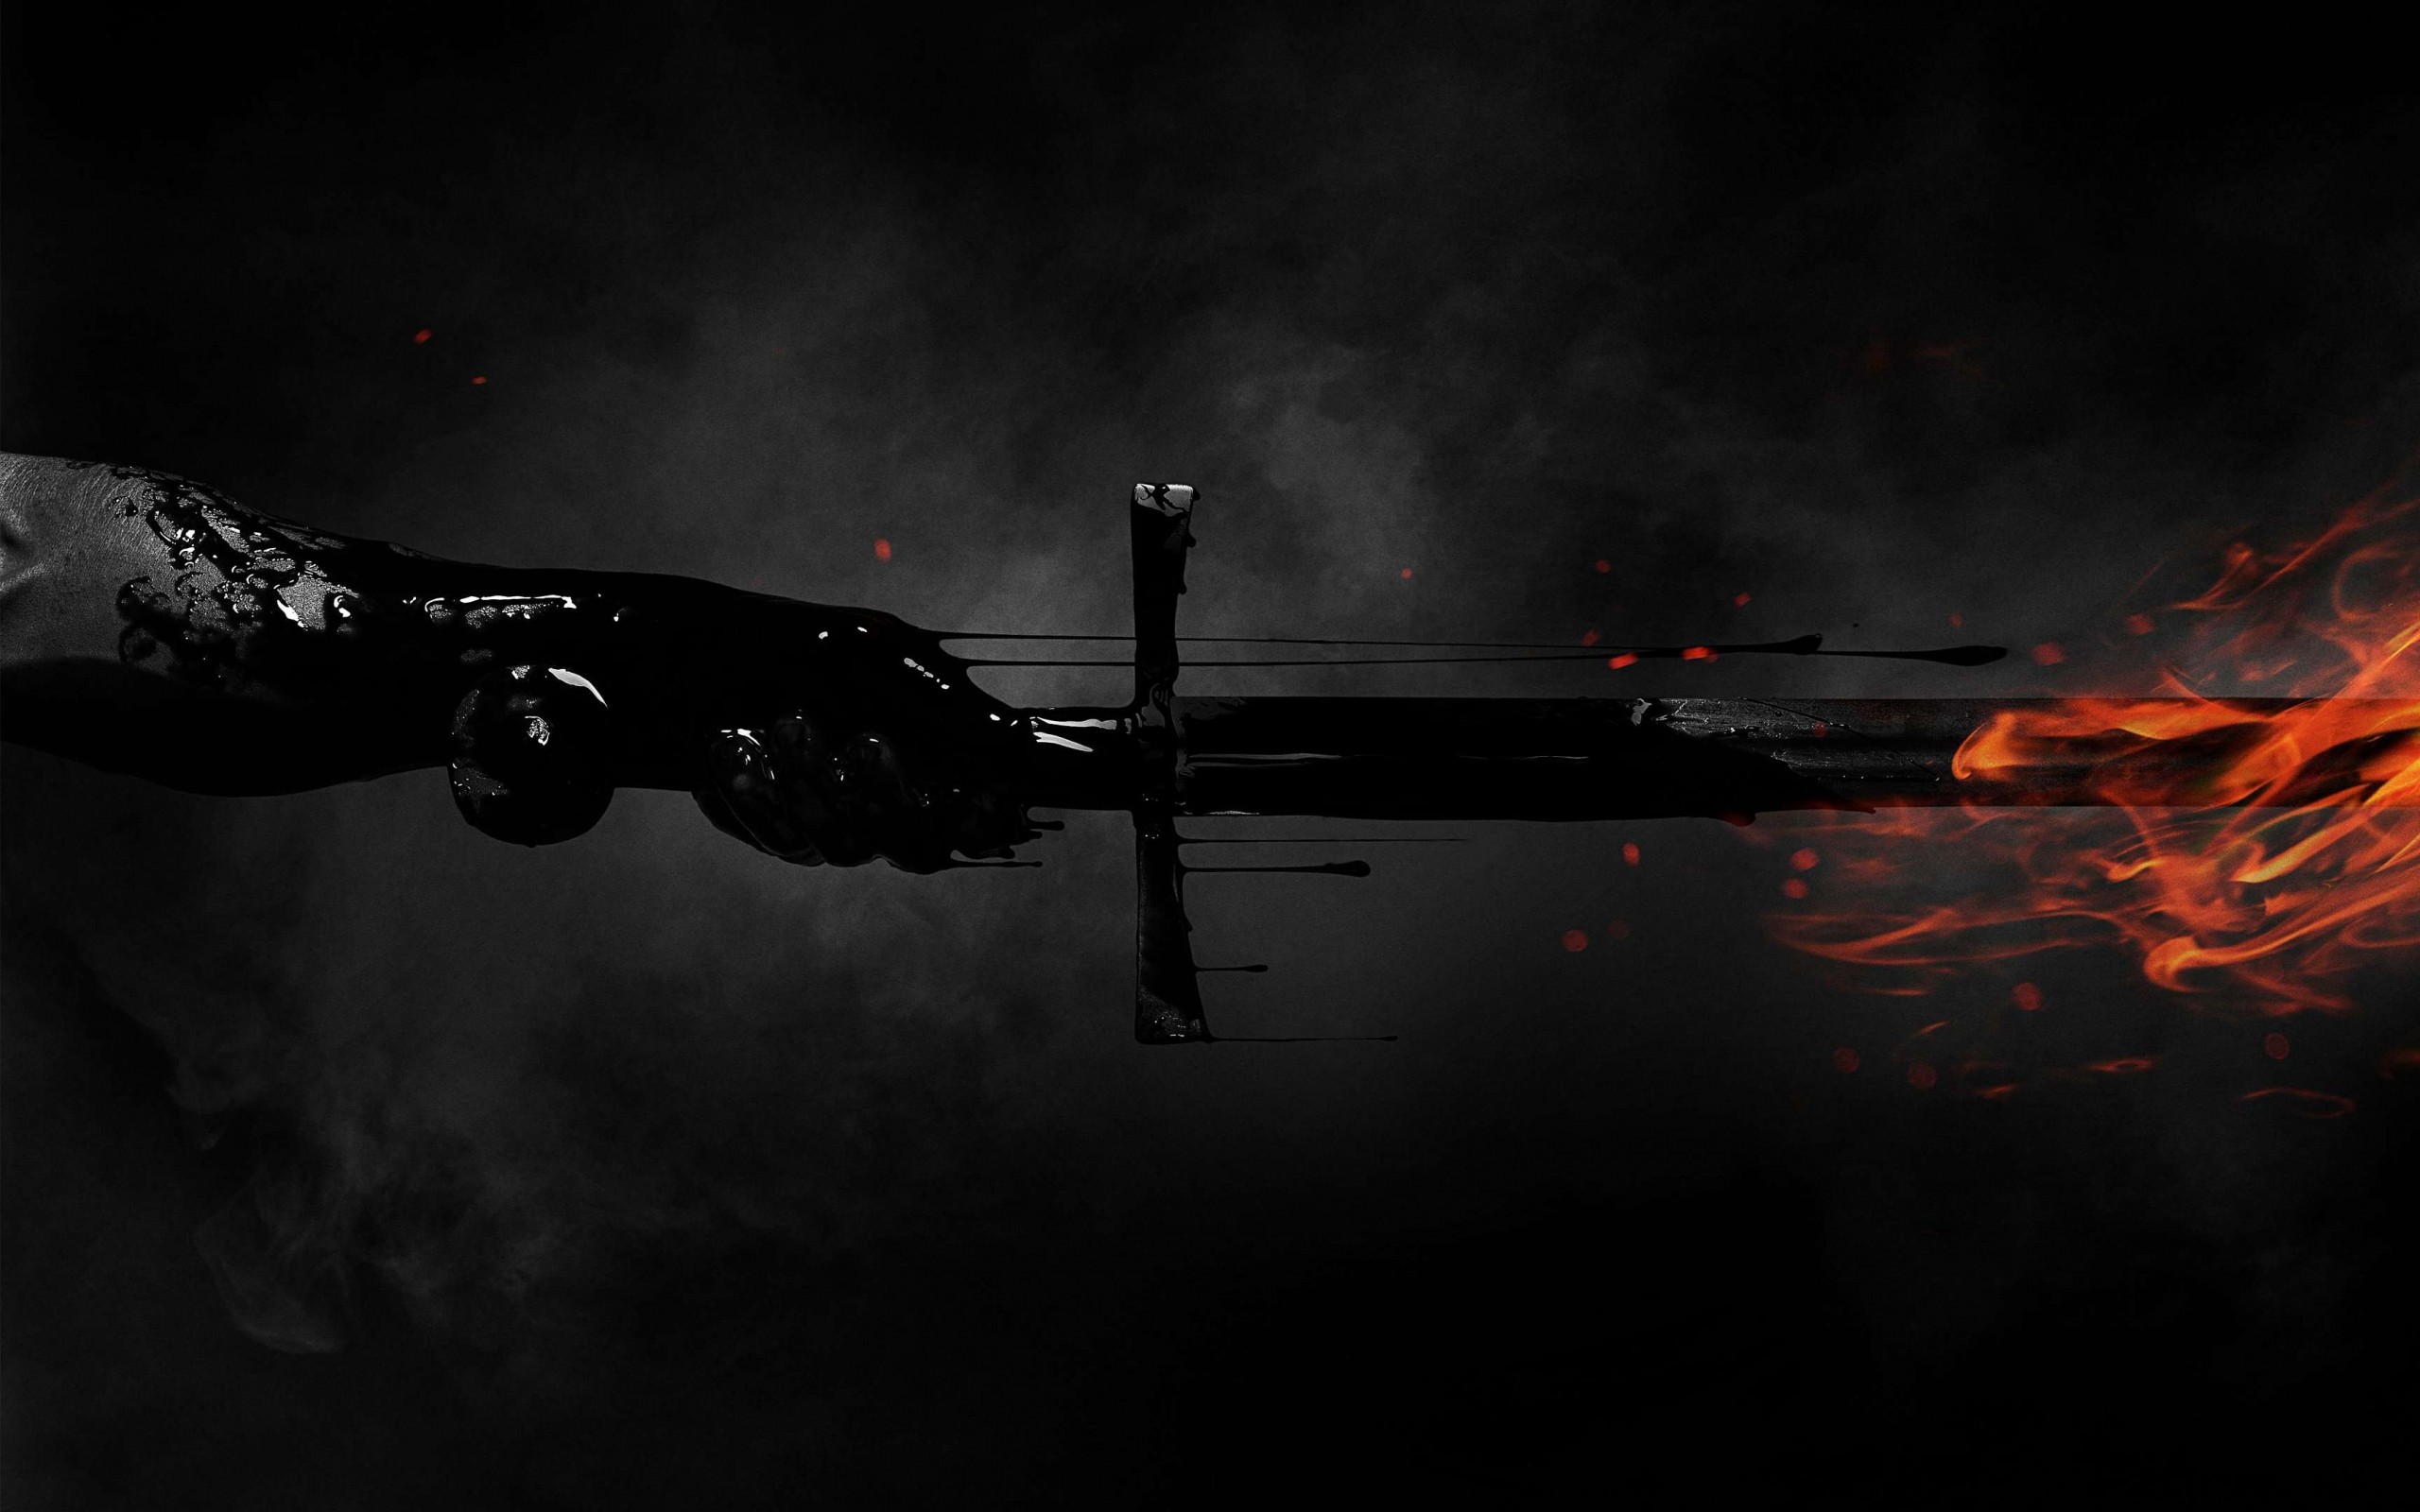 2560x1600 HD Background The Last Witch Hunter Vin Diesel Kaulder Character .